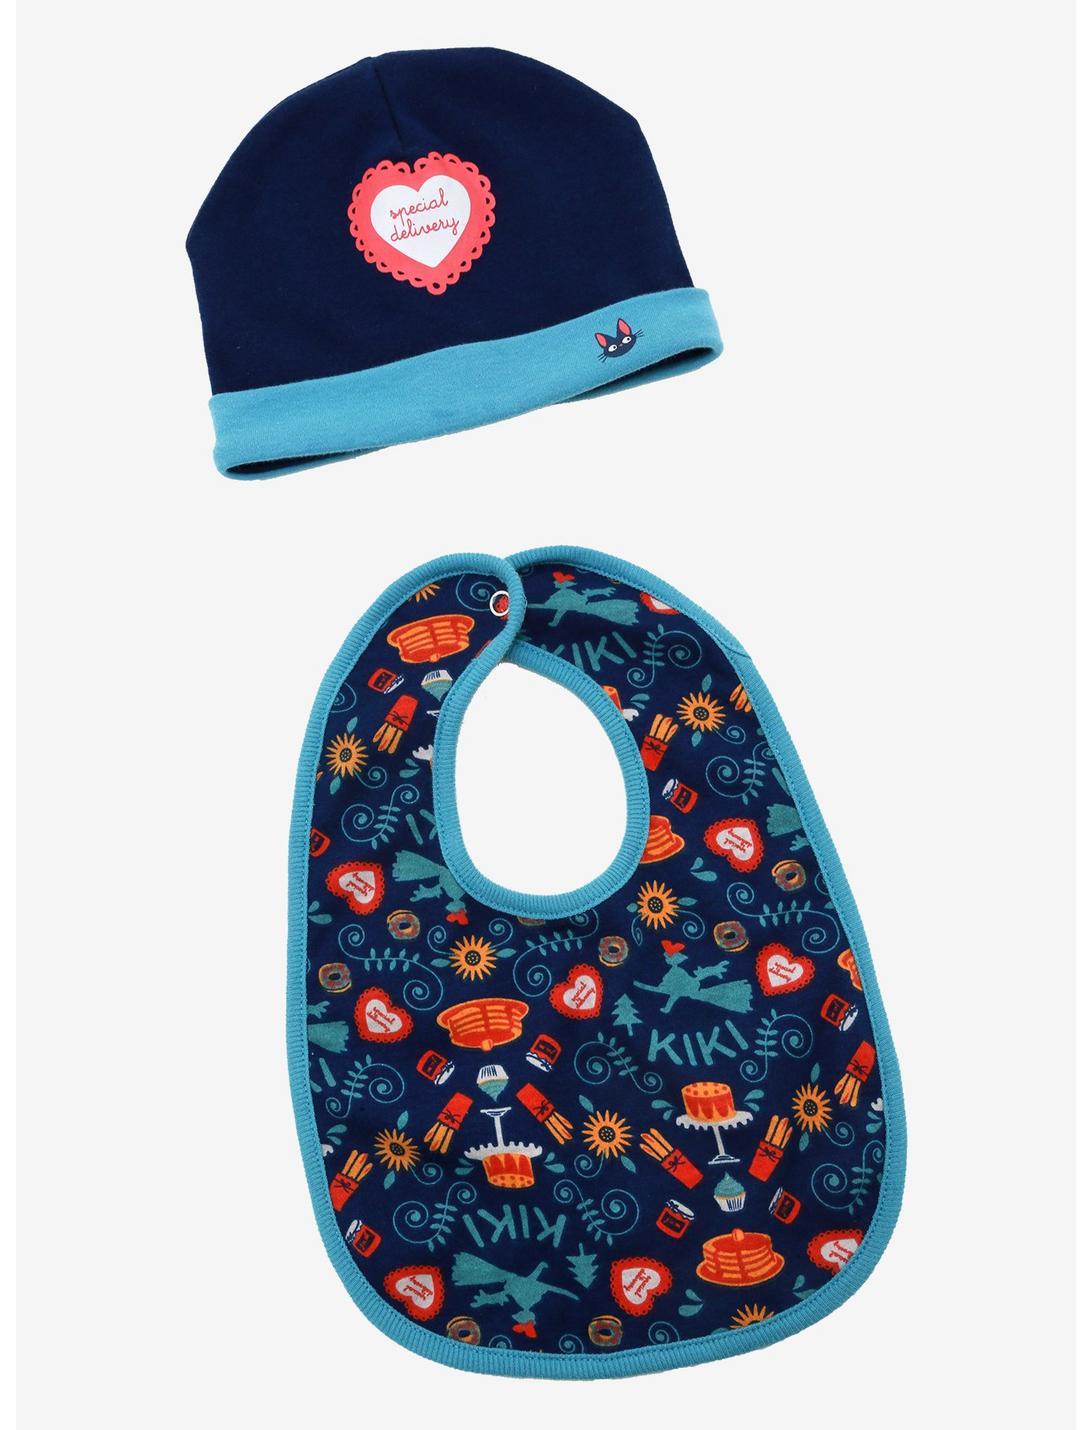 Our Universe Studio Ghibli Kiki's Delivery Service Swedish Bakery Infant Beanie & Bib Set - BoxLunch Exclusive, , hi-res